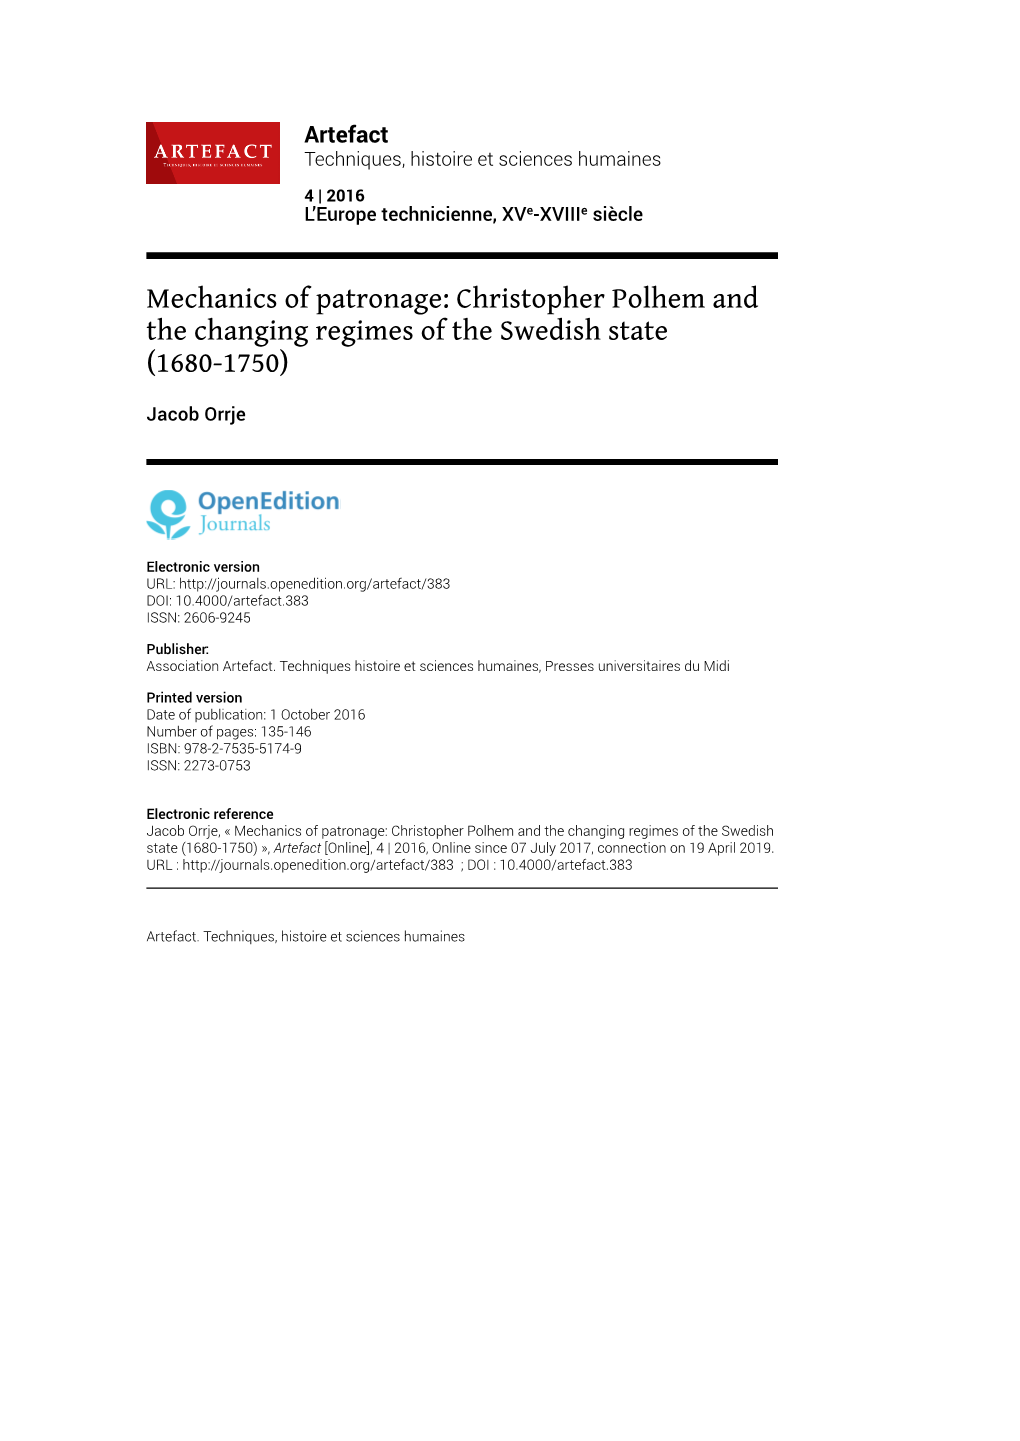 Mechanics of Patronage: Christopher Polhem and the Changing Regimes of the Swedish State \(1680-1750\)